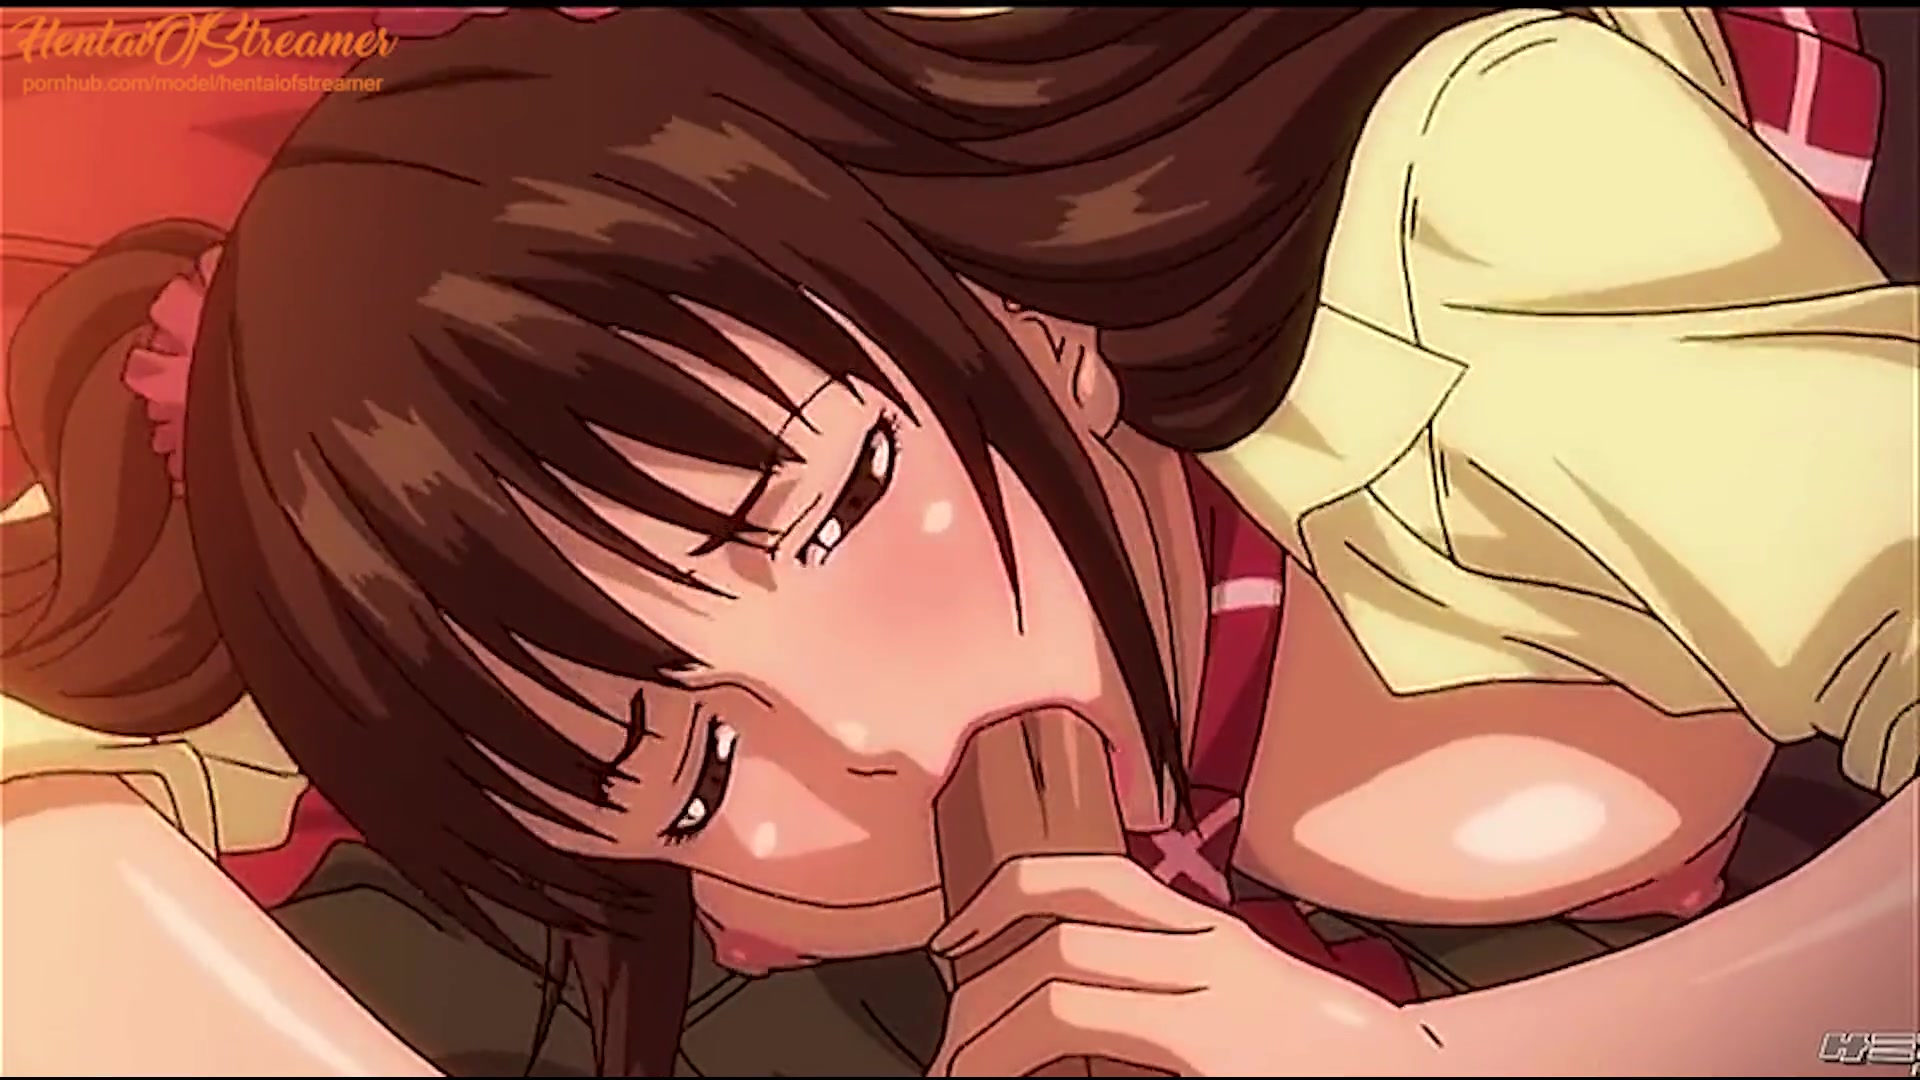 Anime Porn Uncensored - Hotwife Dude Sees his Gf Plumb and Deep-Throat off another Stud - Anime Porn, Anime